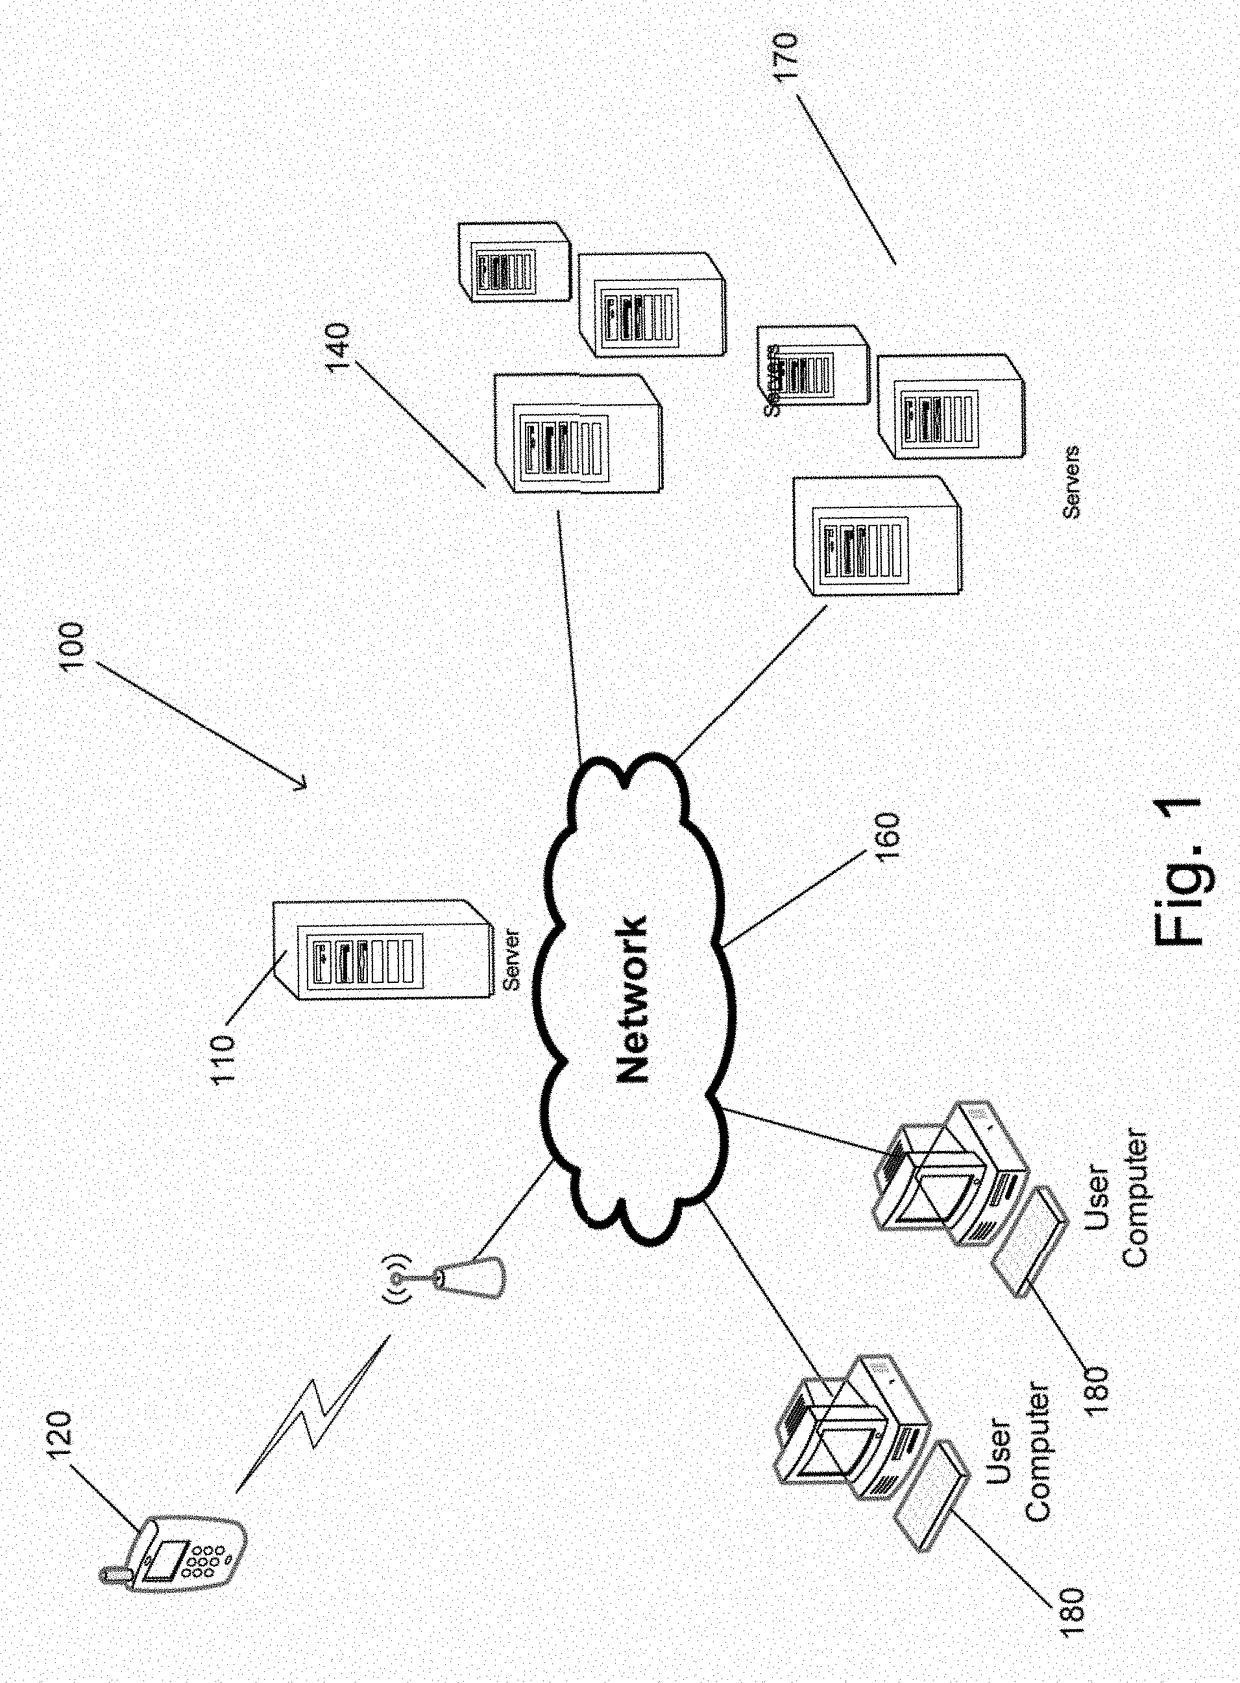 Systems and Methods for Providing Convolutional Neural Network Based Image Synthesis Using Stable and Controllable Parametric Models, a Multiscale Synthesis Framework and Novel Network Architectures